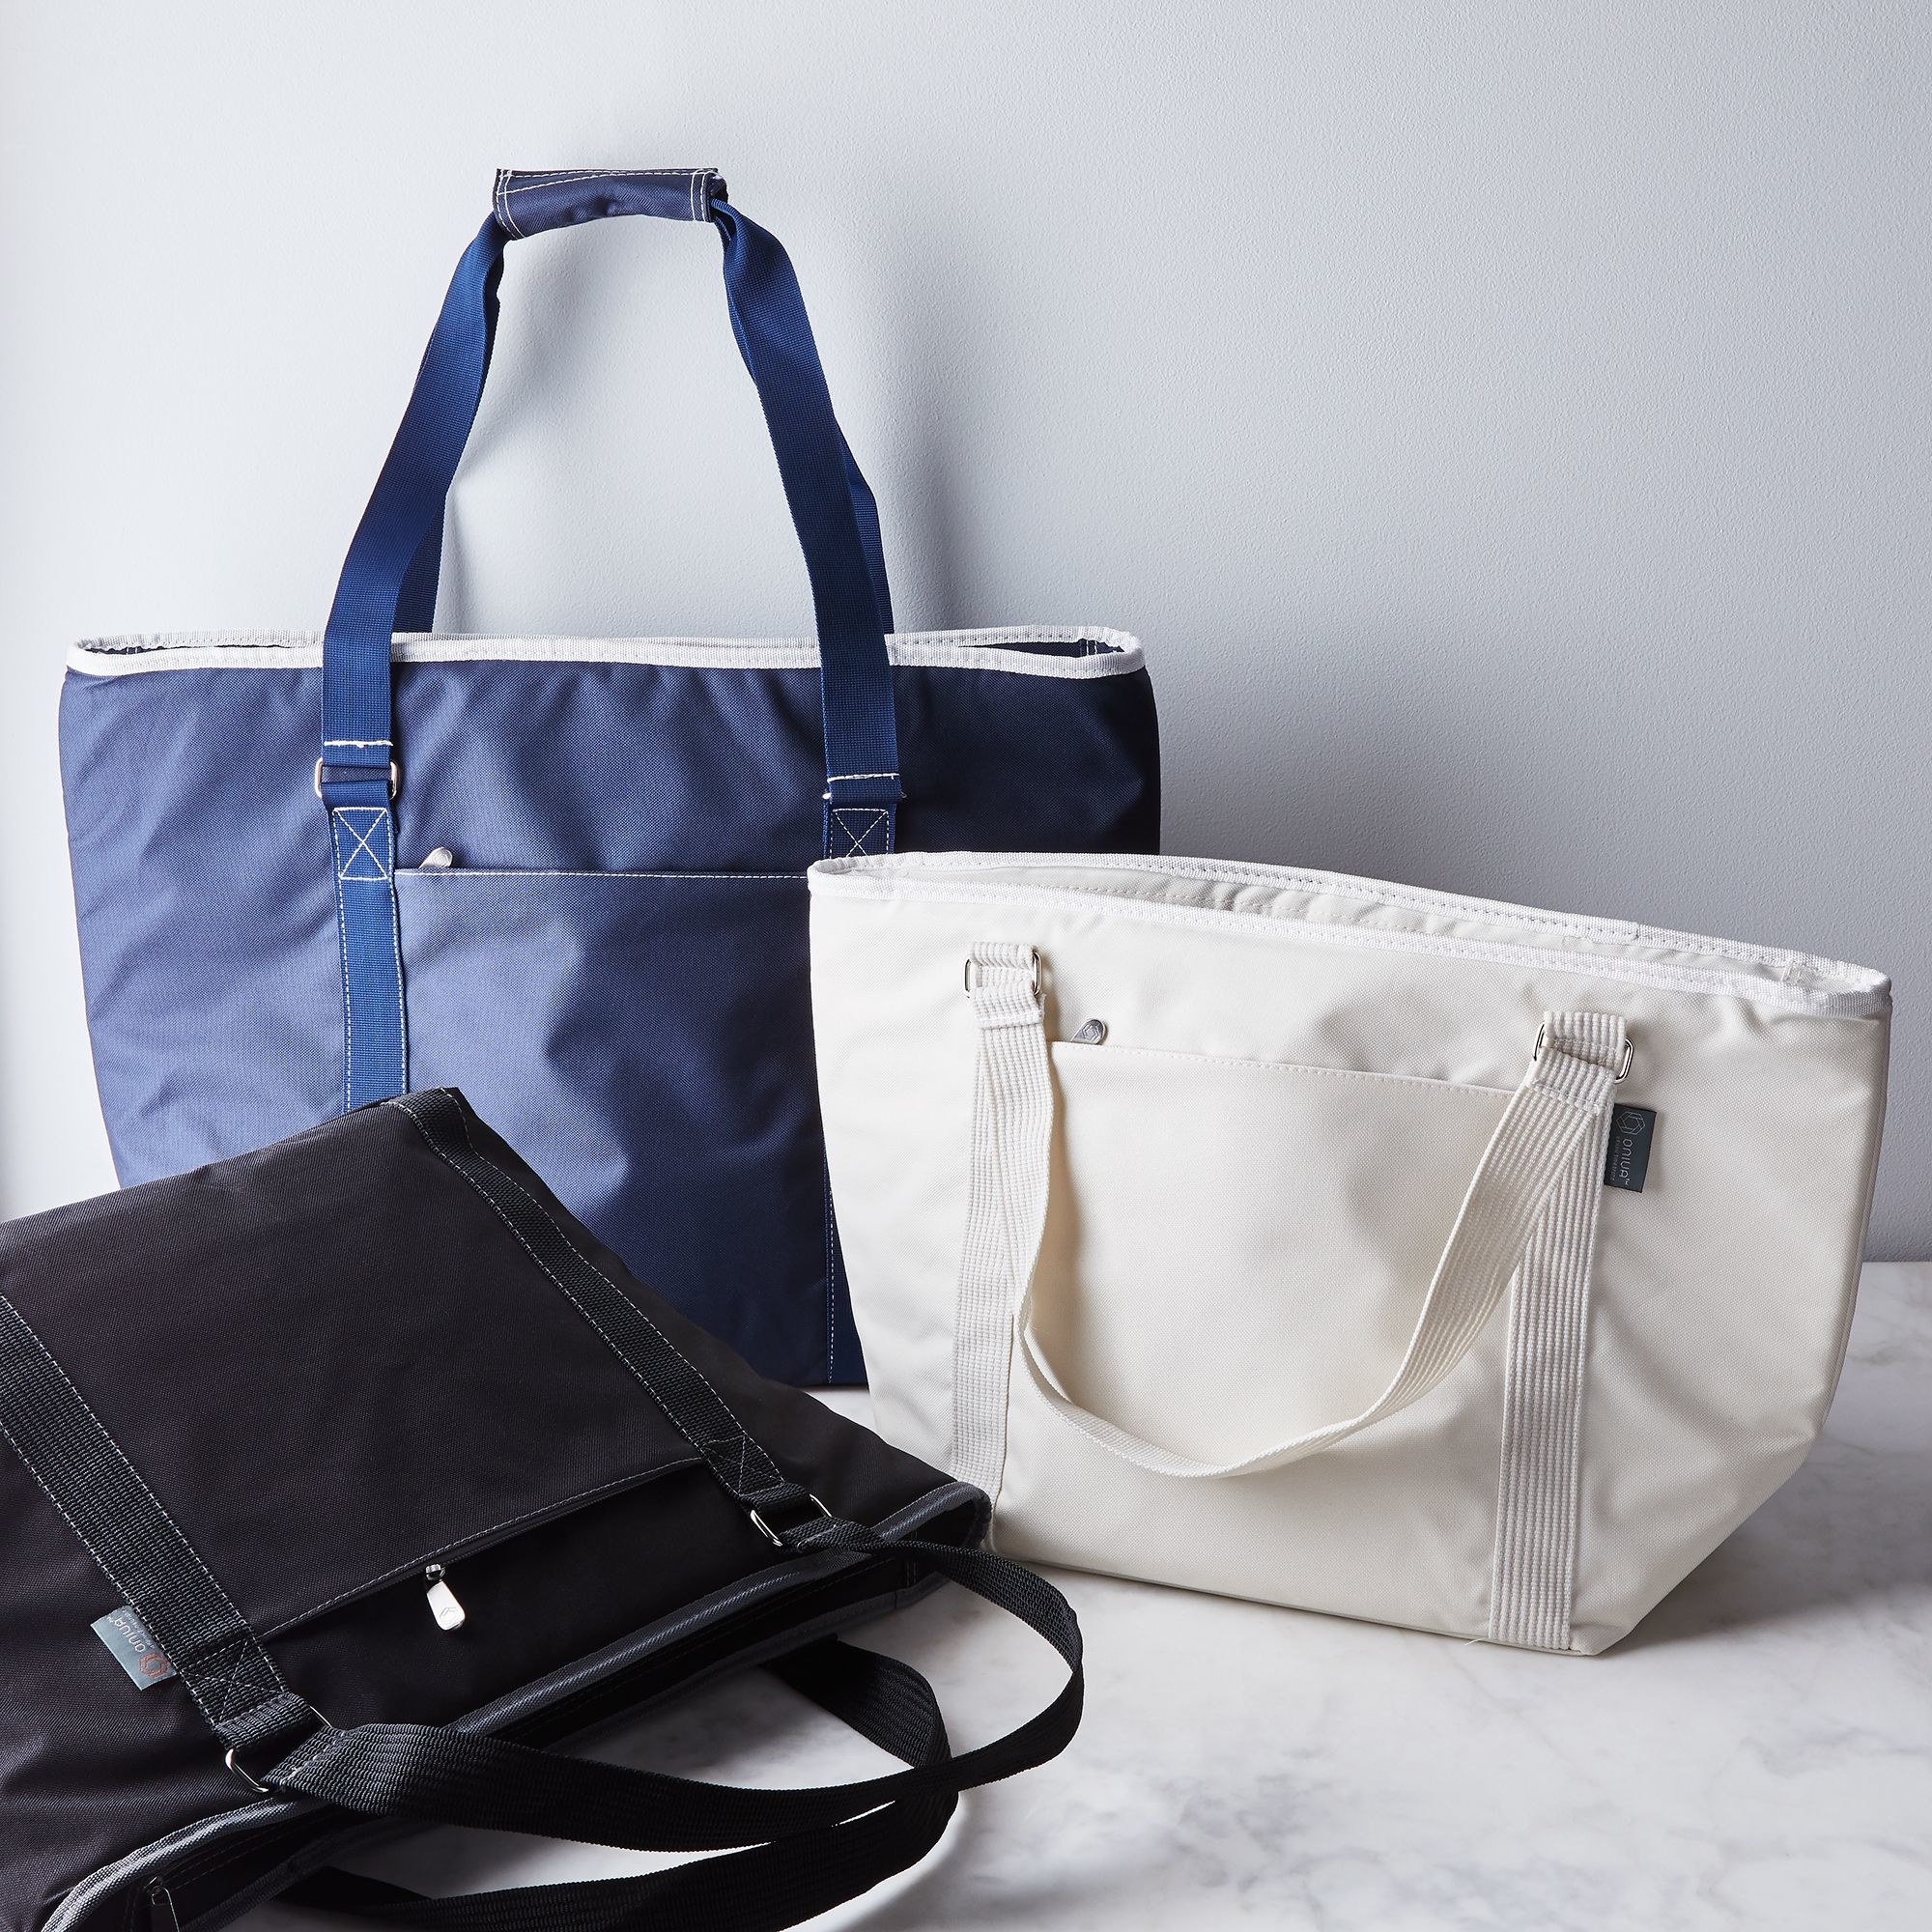 Blue, black, and white cooler tote bags grouped together 